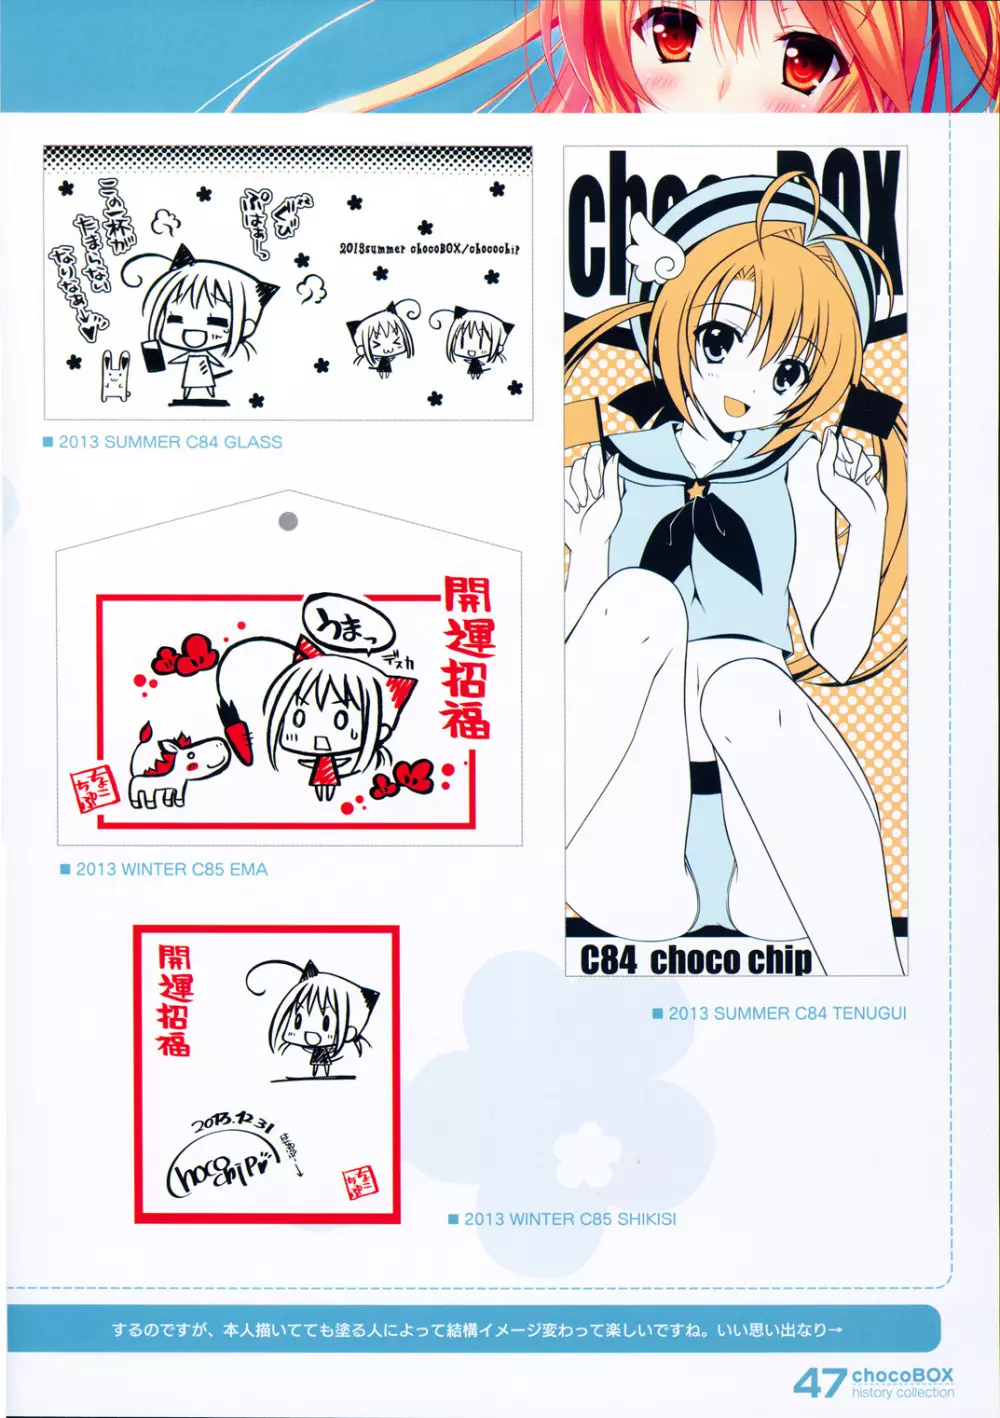 chocoBOX history collection Page.47